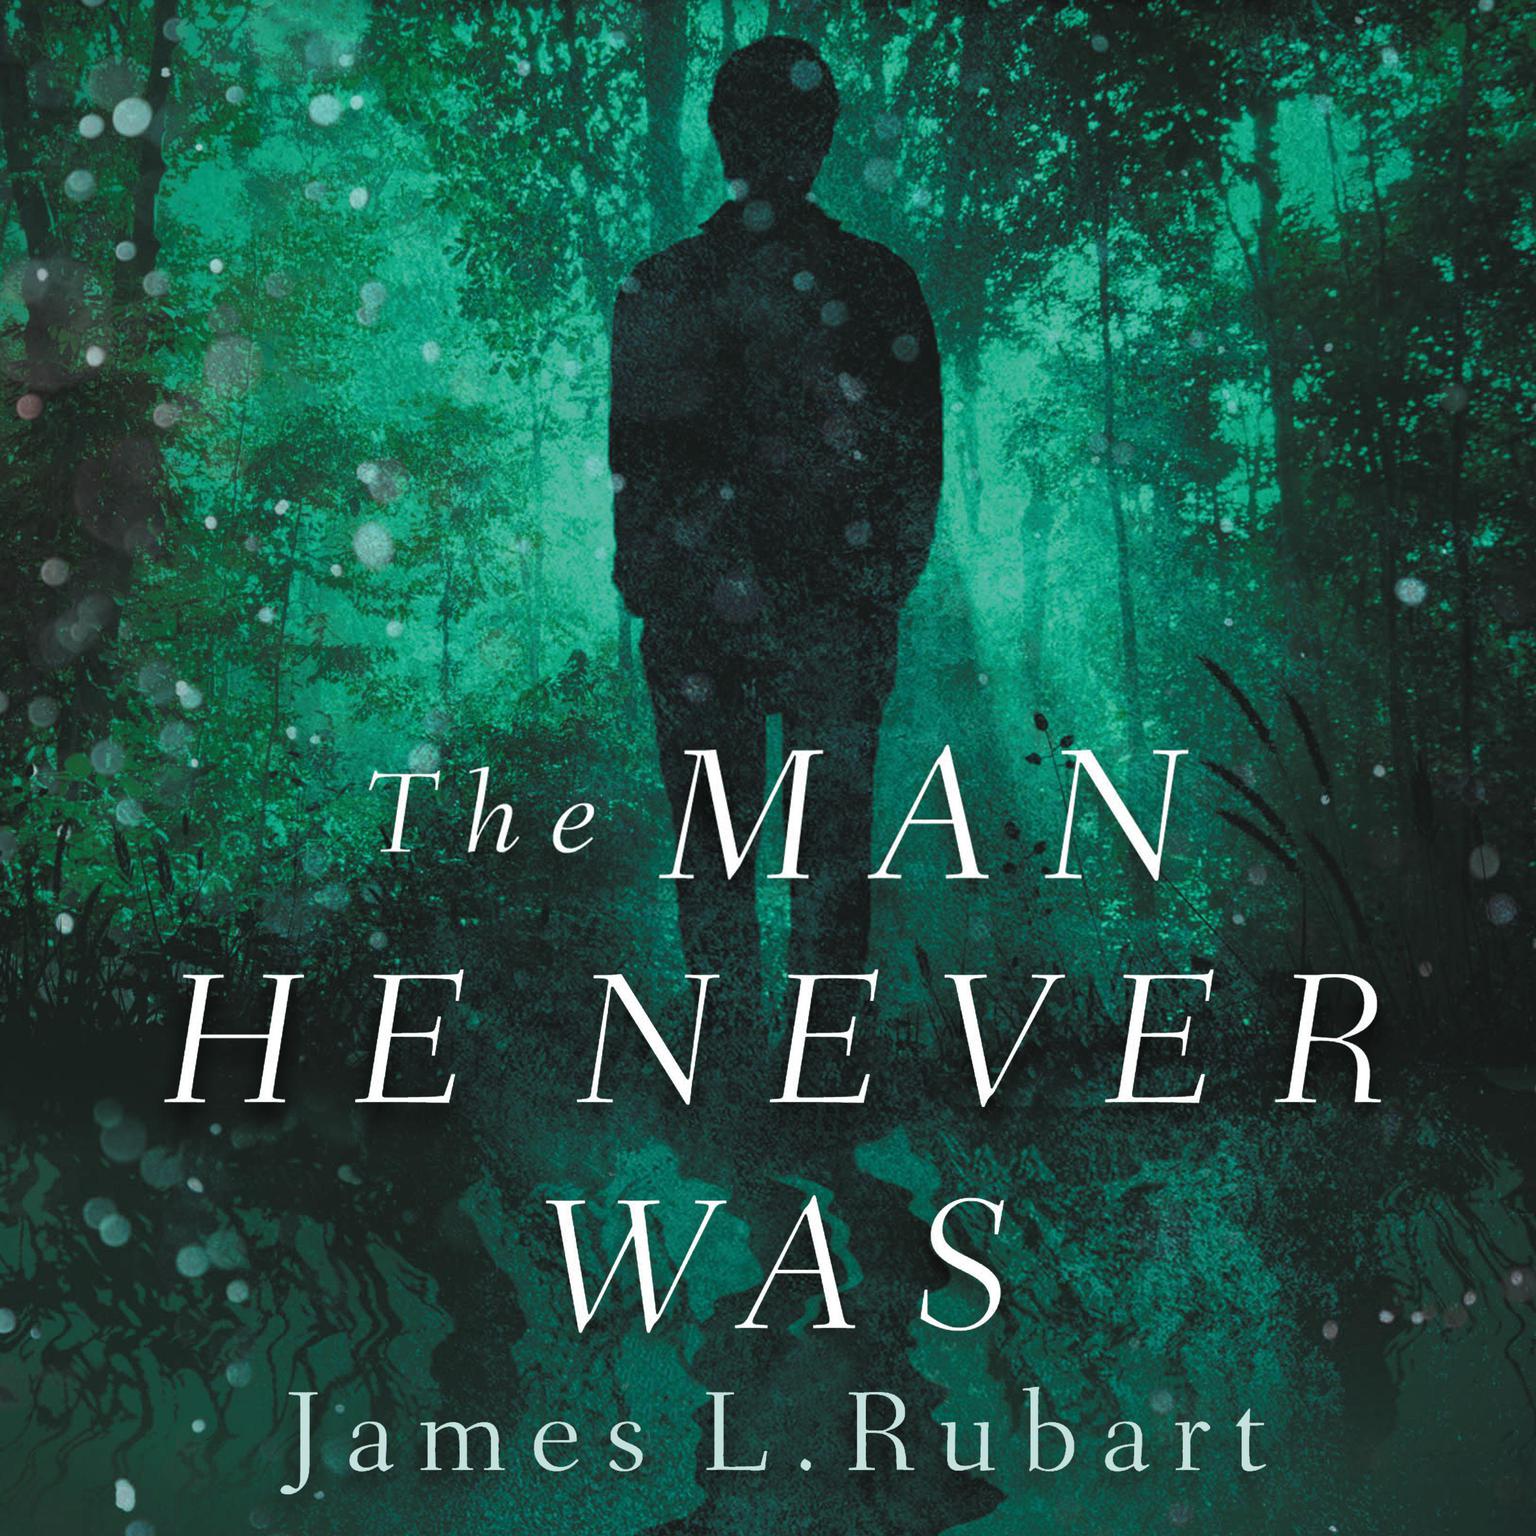 The Man He Never Was: A Modern Reimagining of Jekyll and   Hyde Audiobook, by James L. Rubart